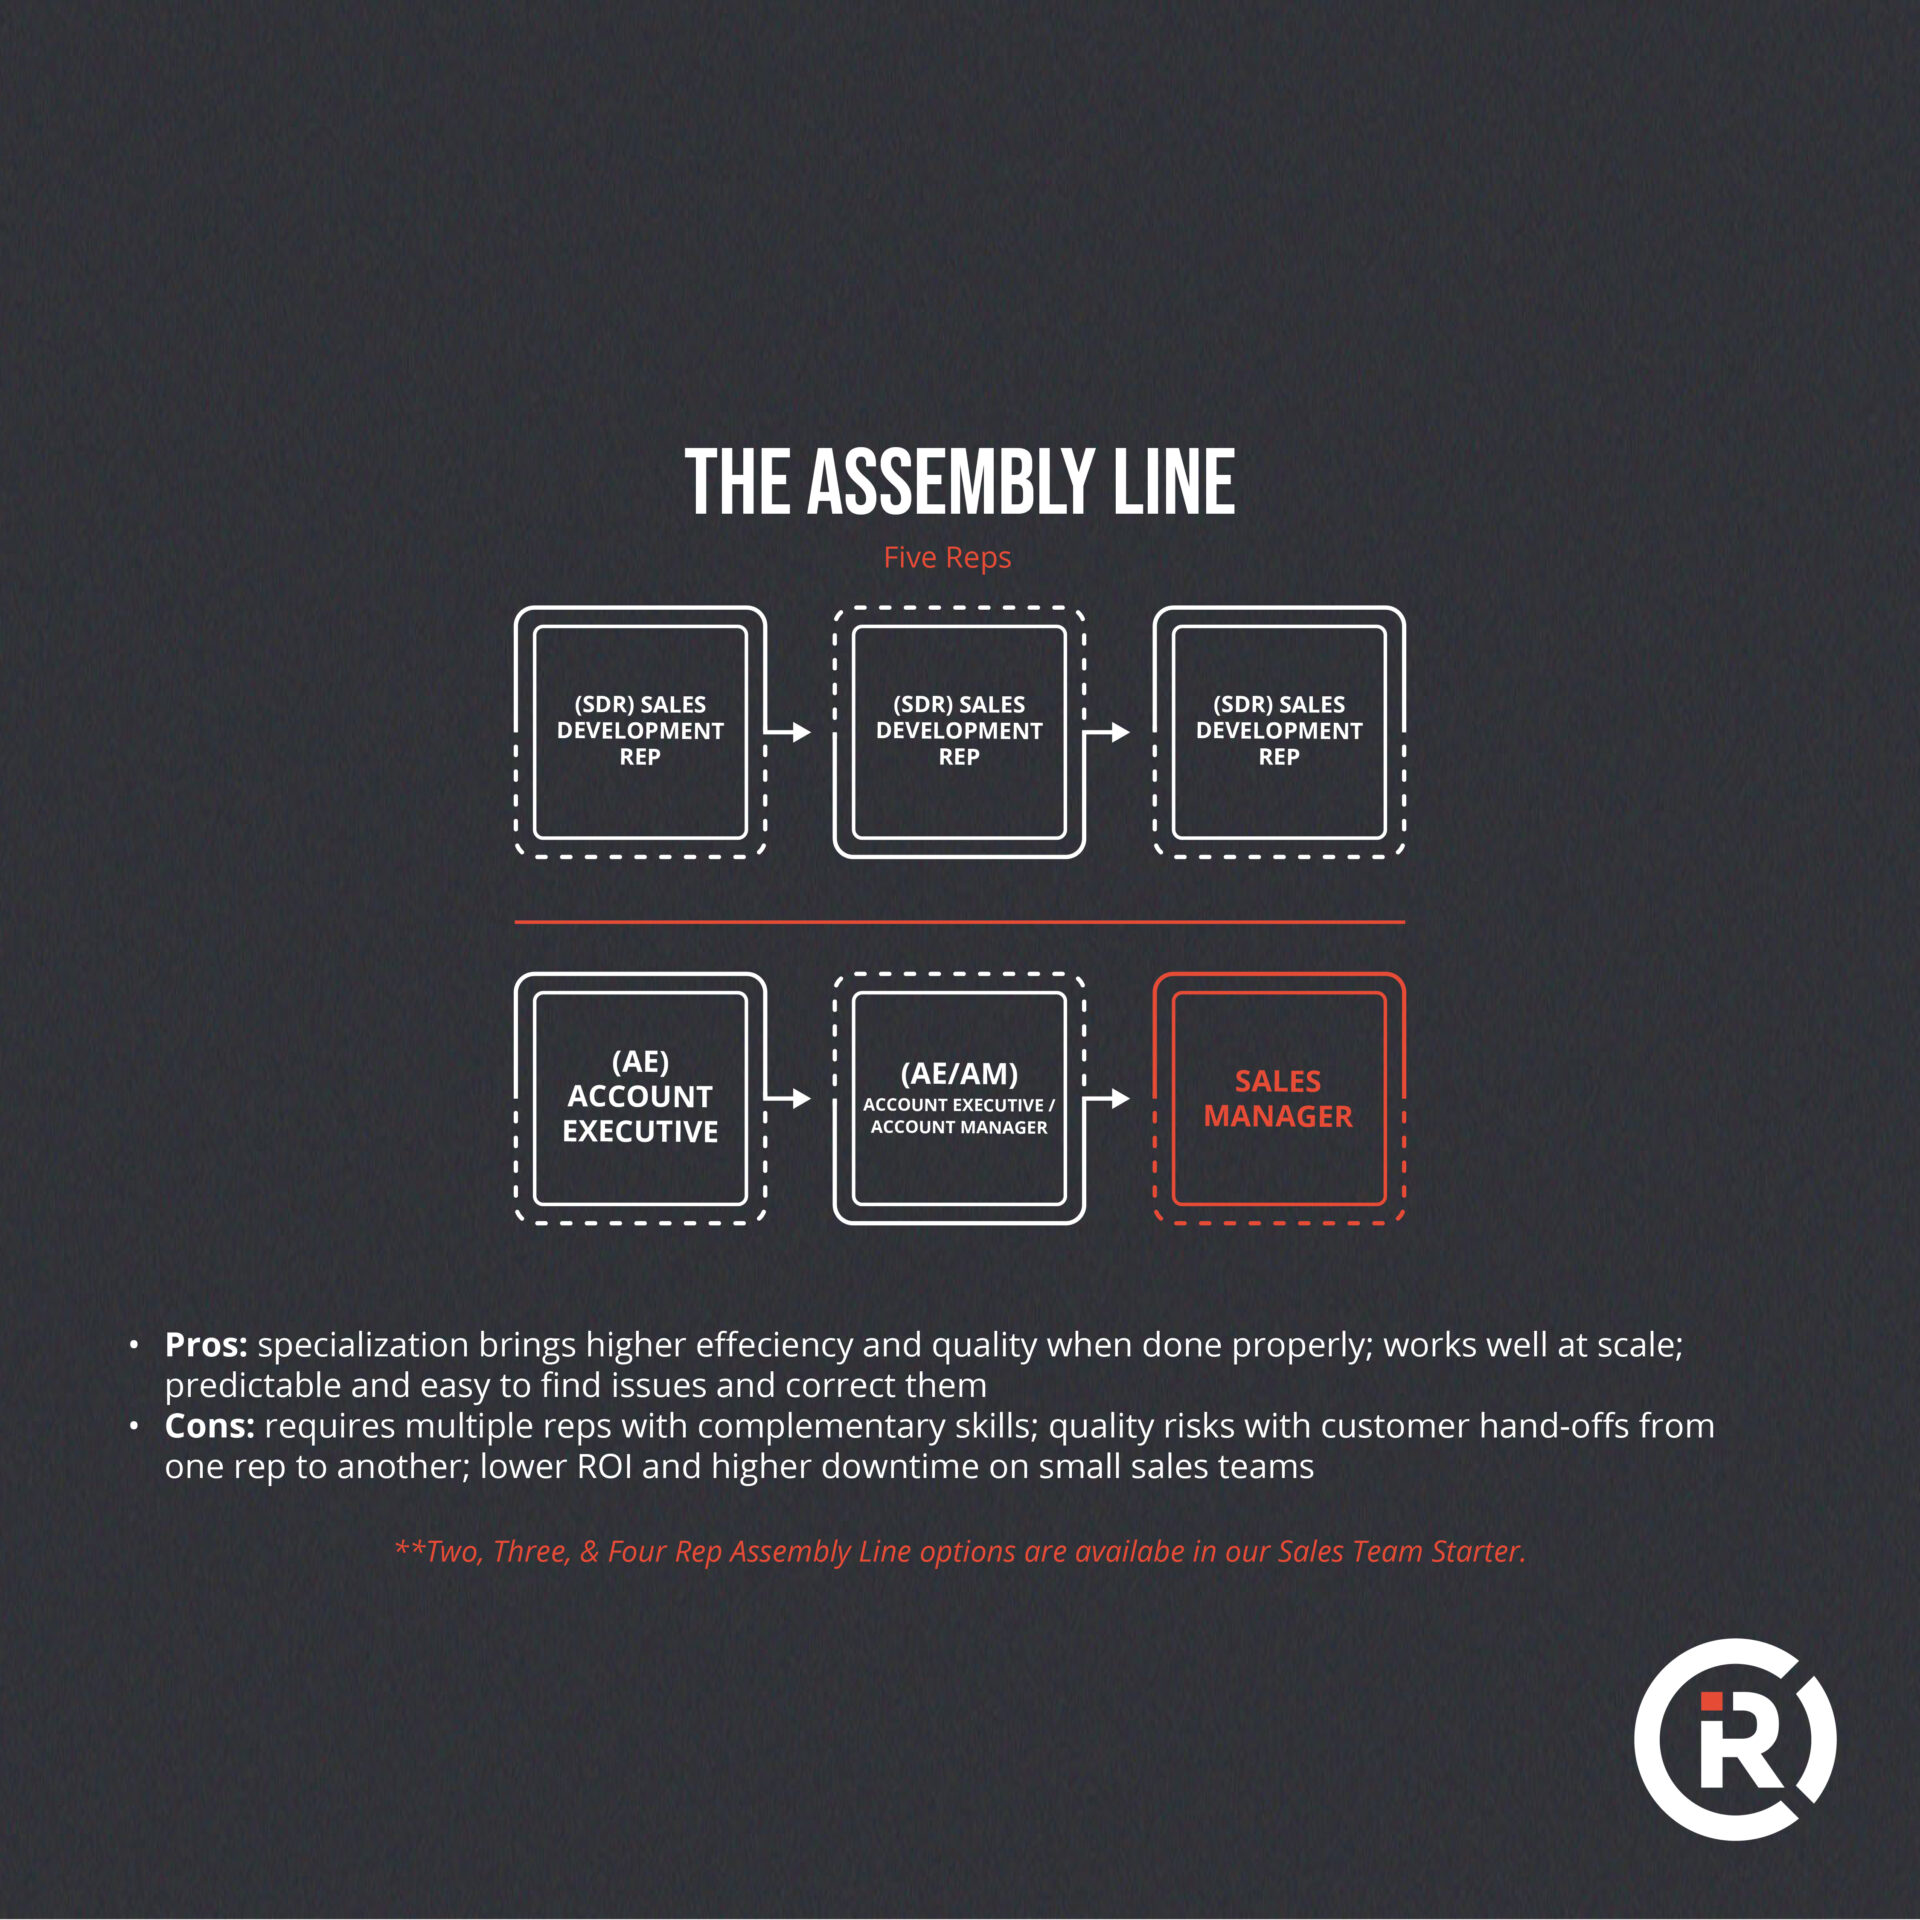 Chart showing details on steps for the assembly line method.